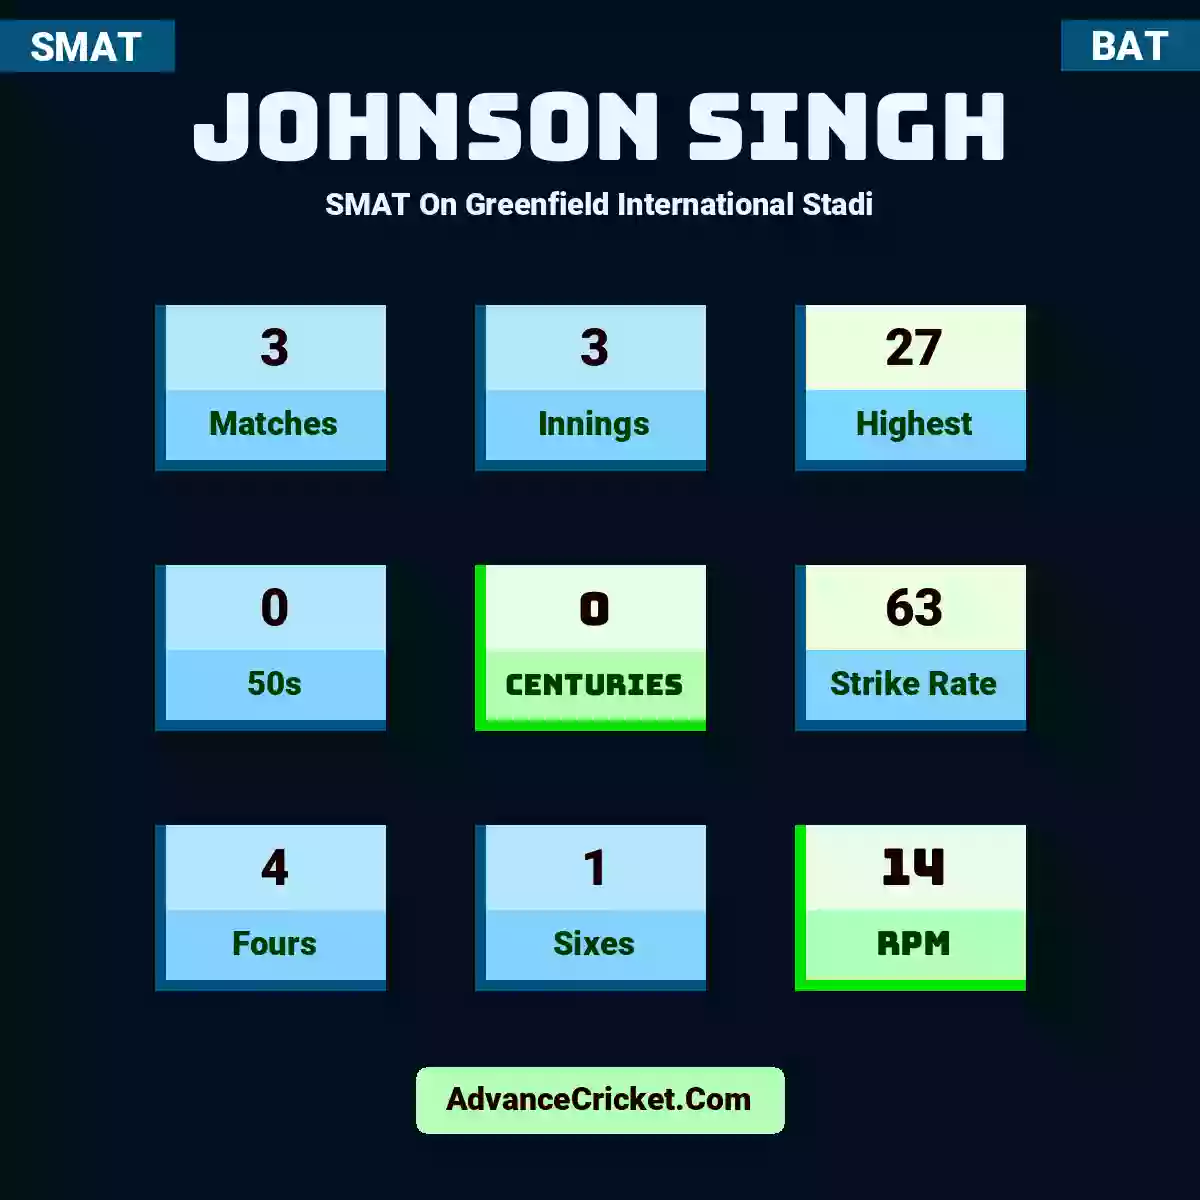 Johnson Singh SMAT  On Greenfield International Stadi, Johnson Singh played 3 matches, scored 27 runs as highest, 0 half-centuries, and 0 centuries, with a strike rate of 63. J.Singh hit 4 fours and 1 sixes, with an RPM of 14.